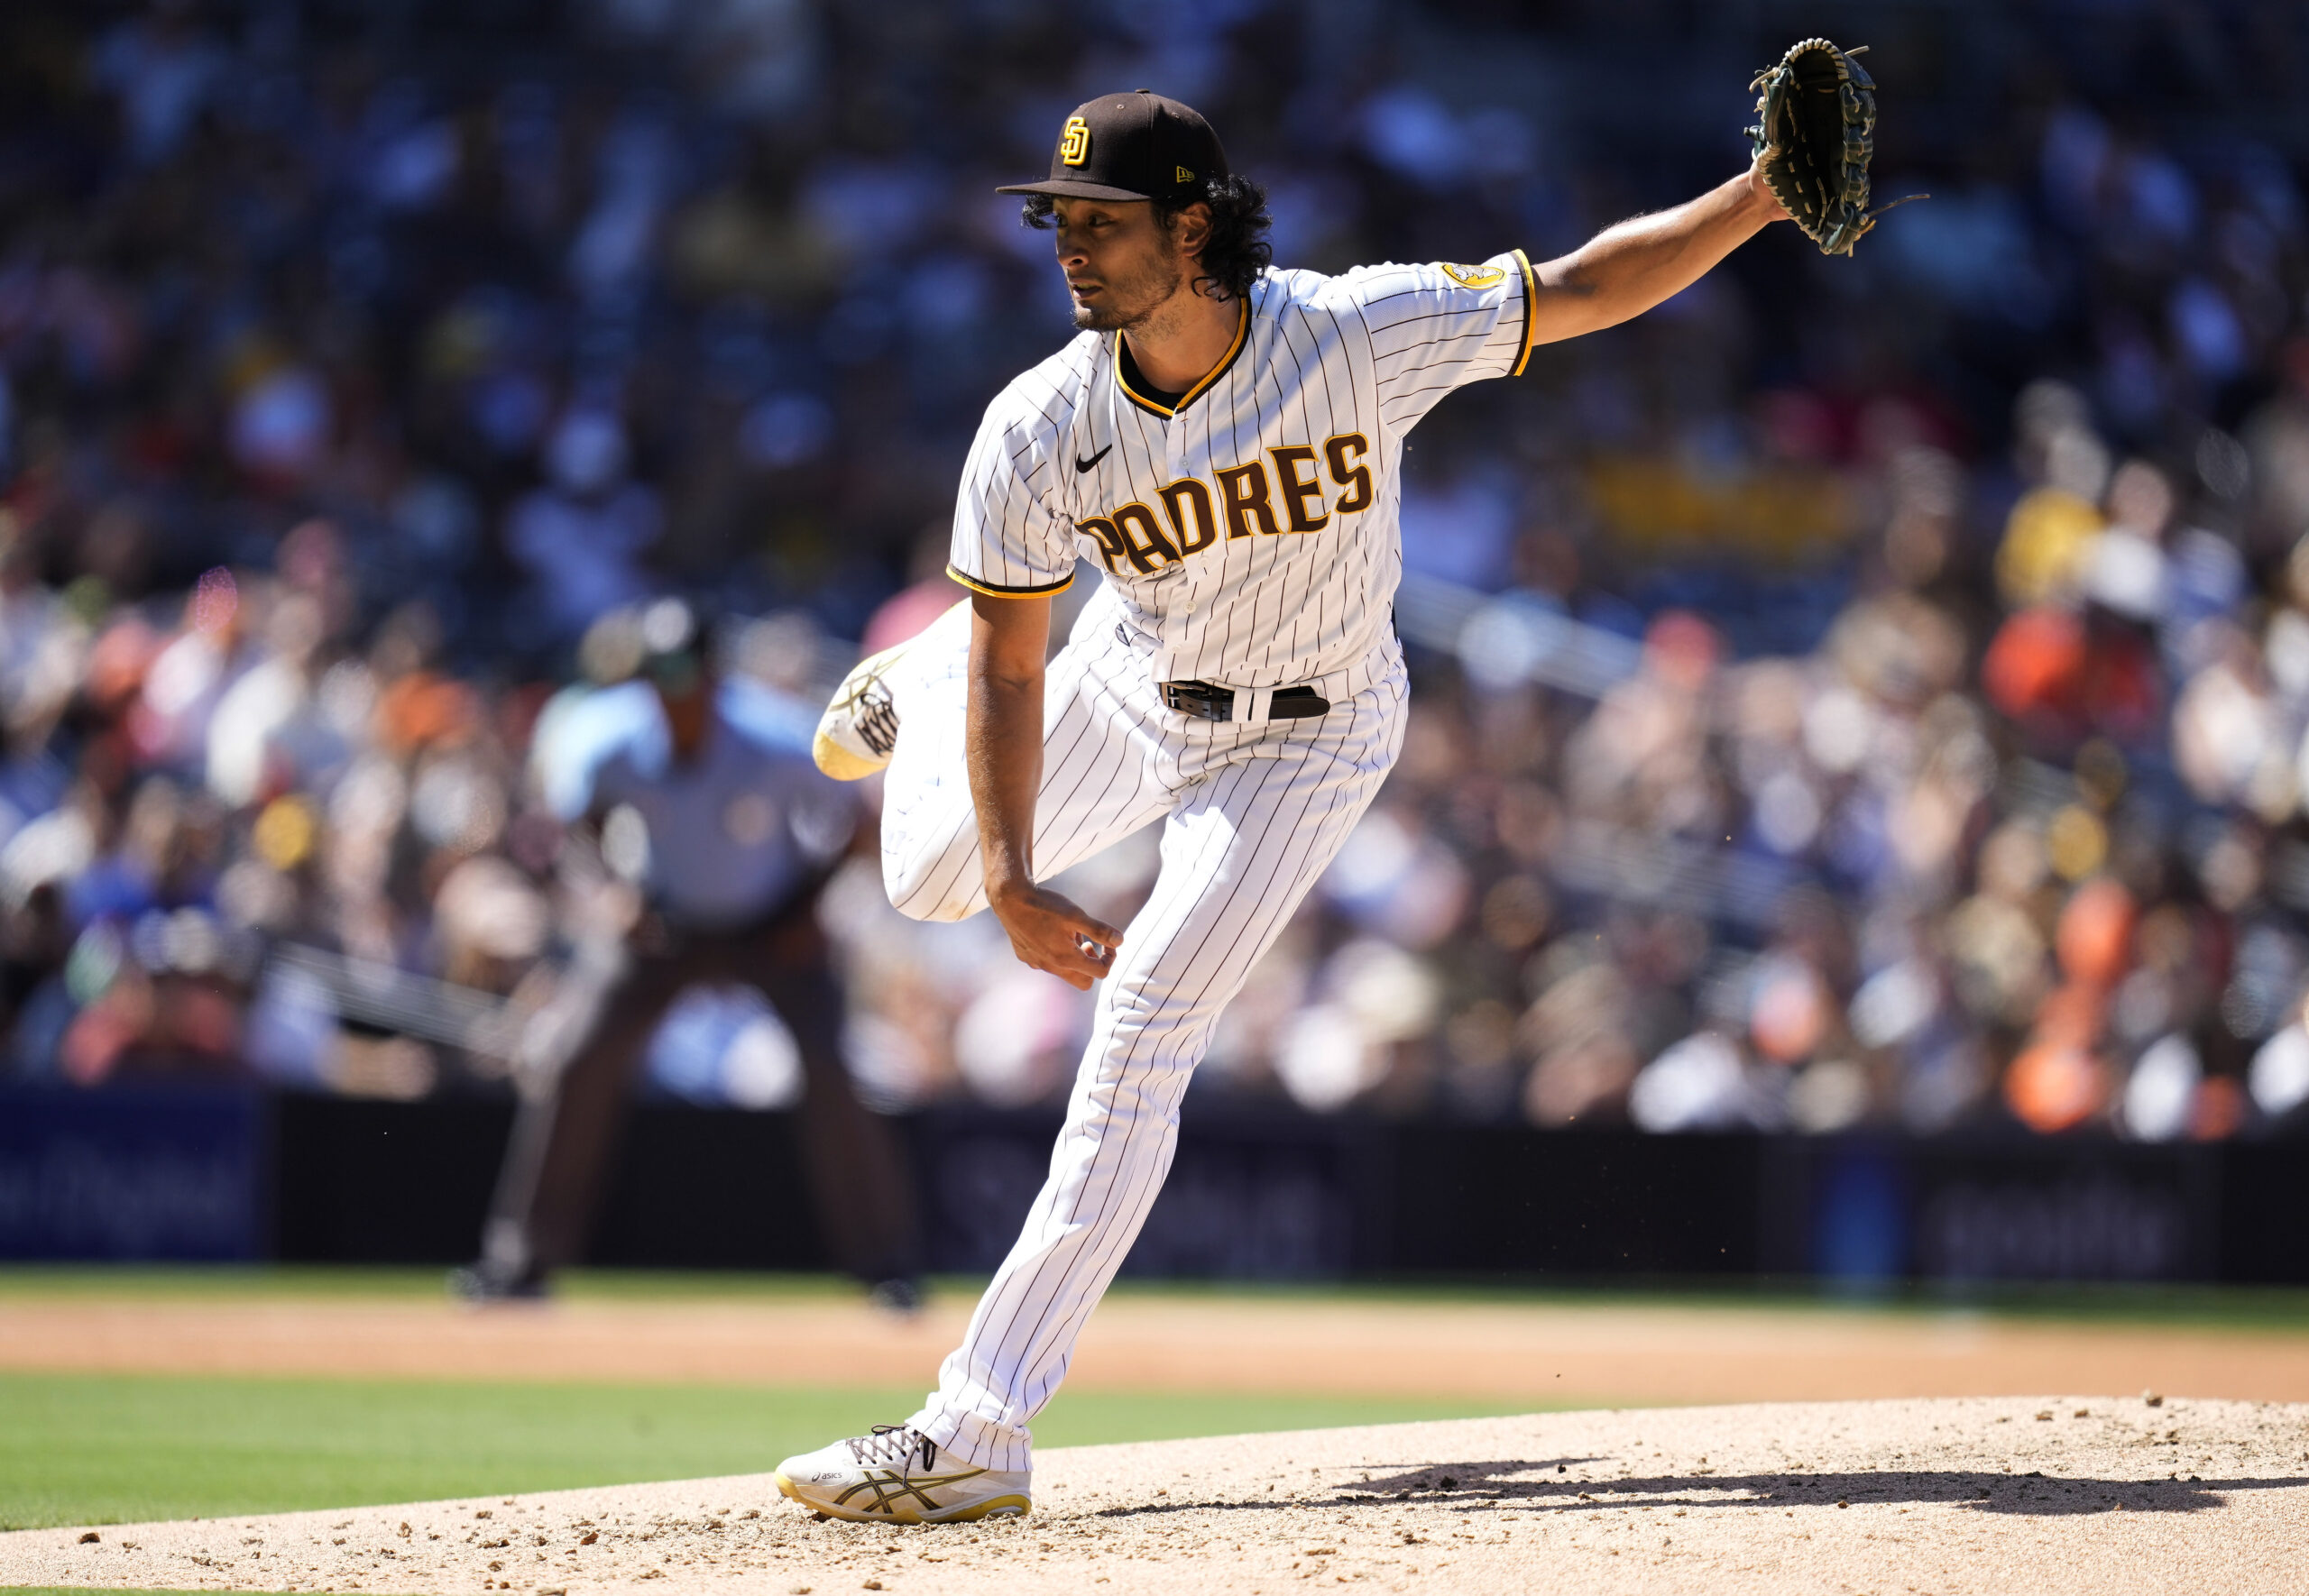 San Diego, California, June 20, 2022. Yu Darvish of the San Diego Padres  pitches against the Arizona Diamondbacks in a baseball game at Petco Park  in San Diego, California, on June 20